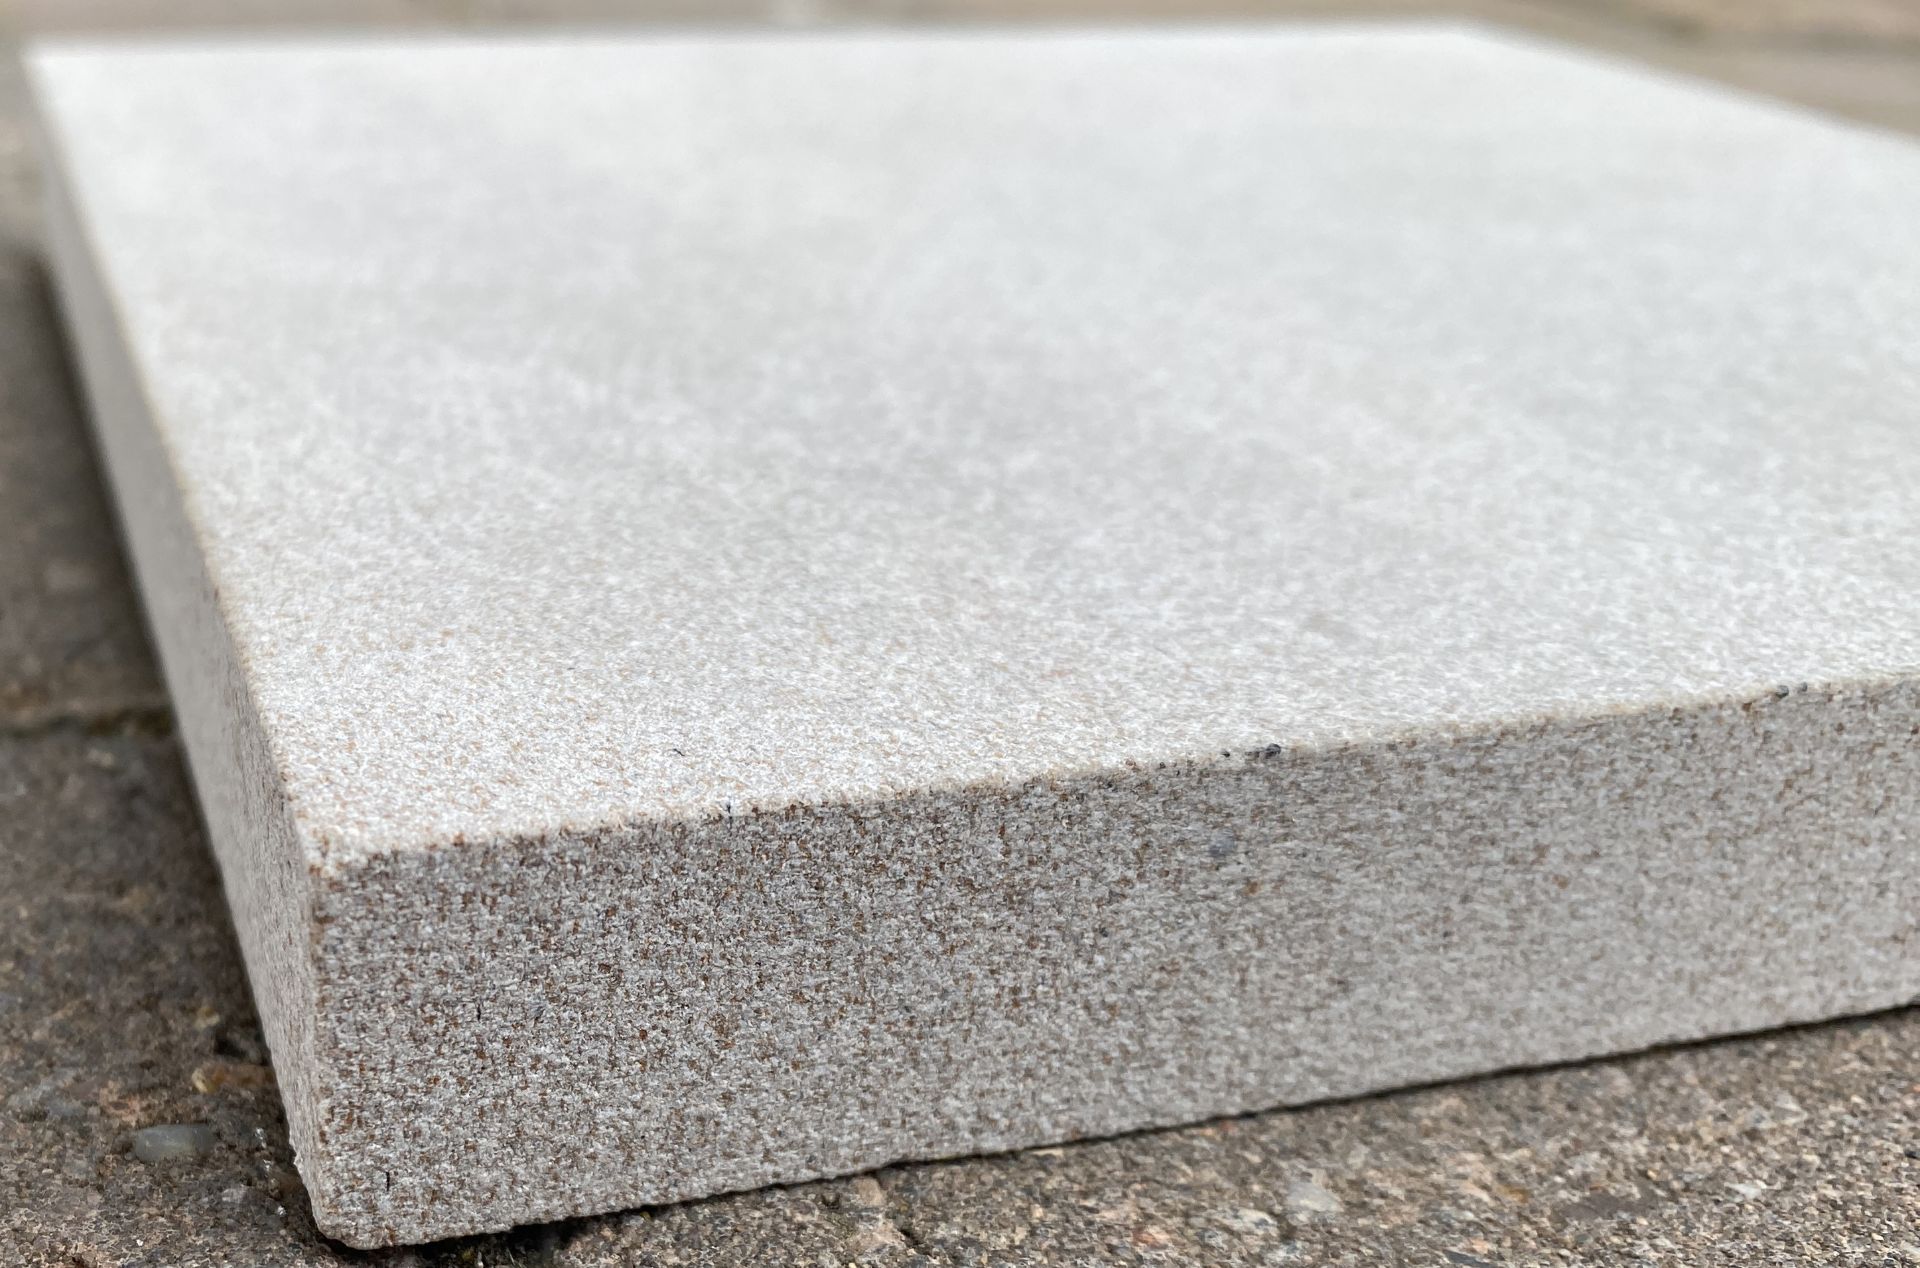 Contents to 3 pallets of BLOCKSTONE MOUSELOW NATURAL SANDSTONE, RUBBED FINISH FACING/PATIO STONE. - Bild 6 aus 8